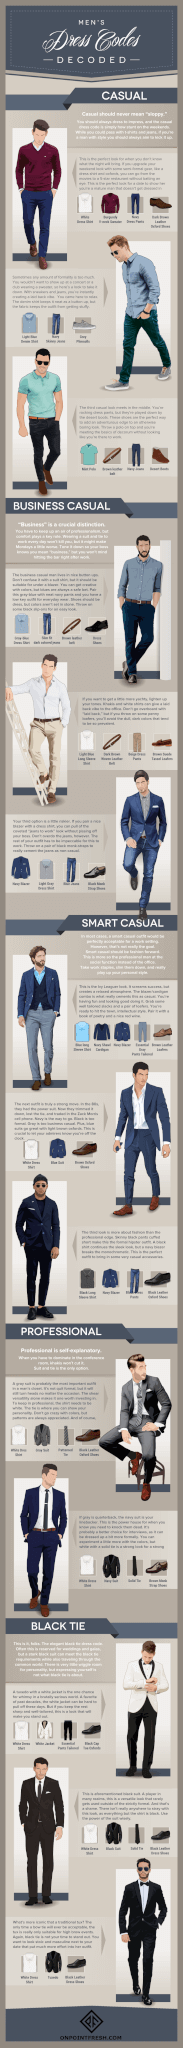 Men's Dress Codes Decoded [Infographic]